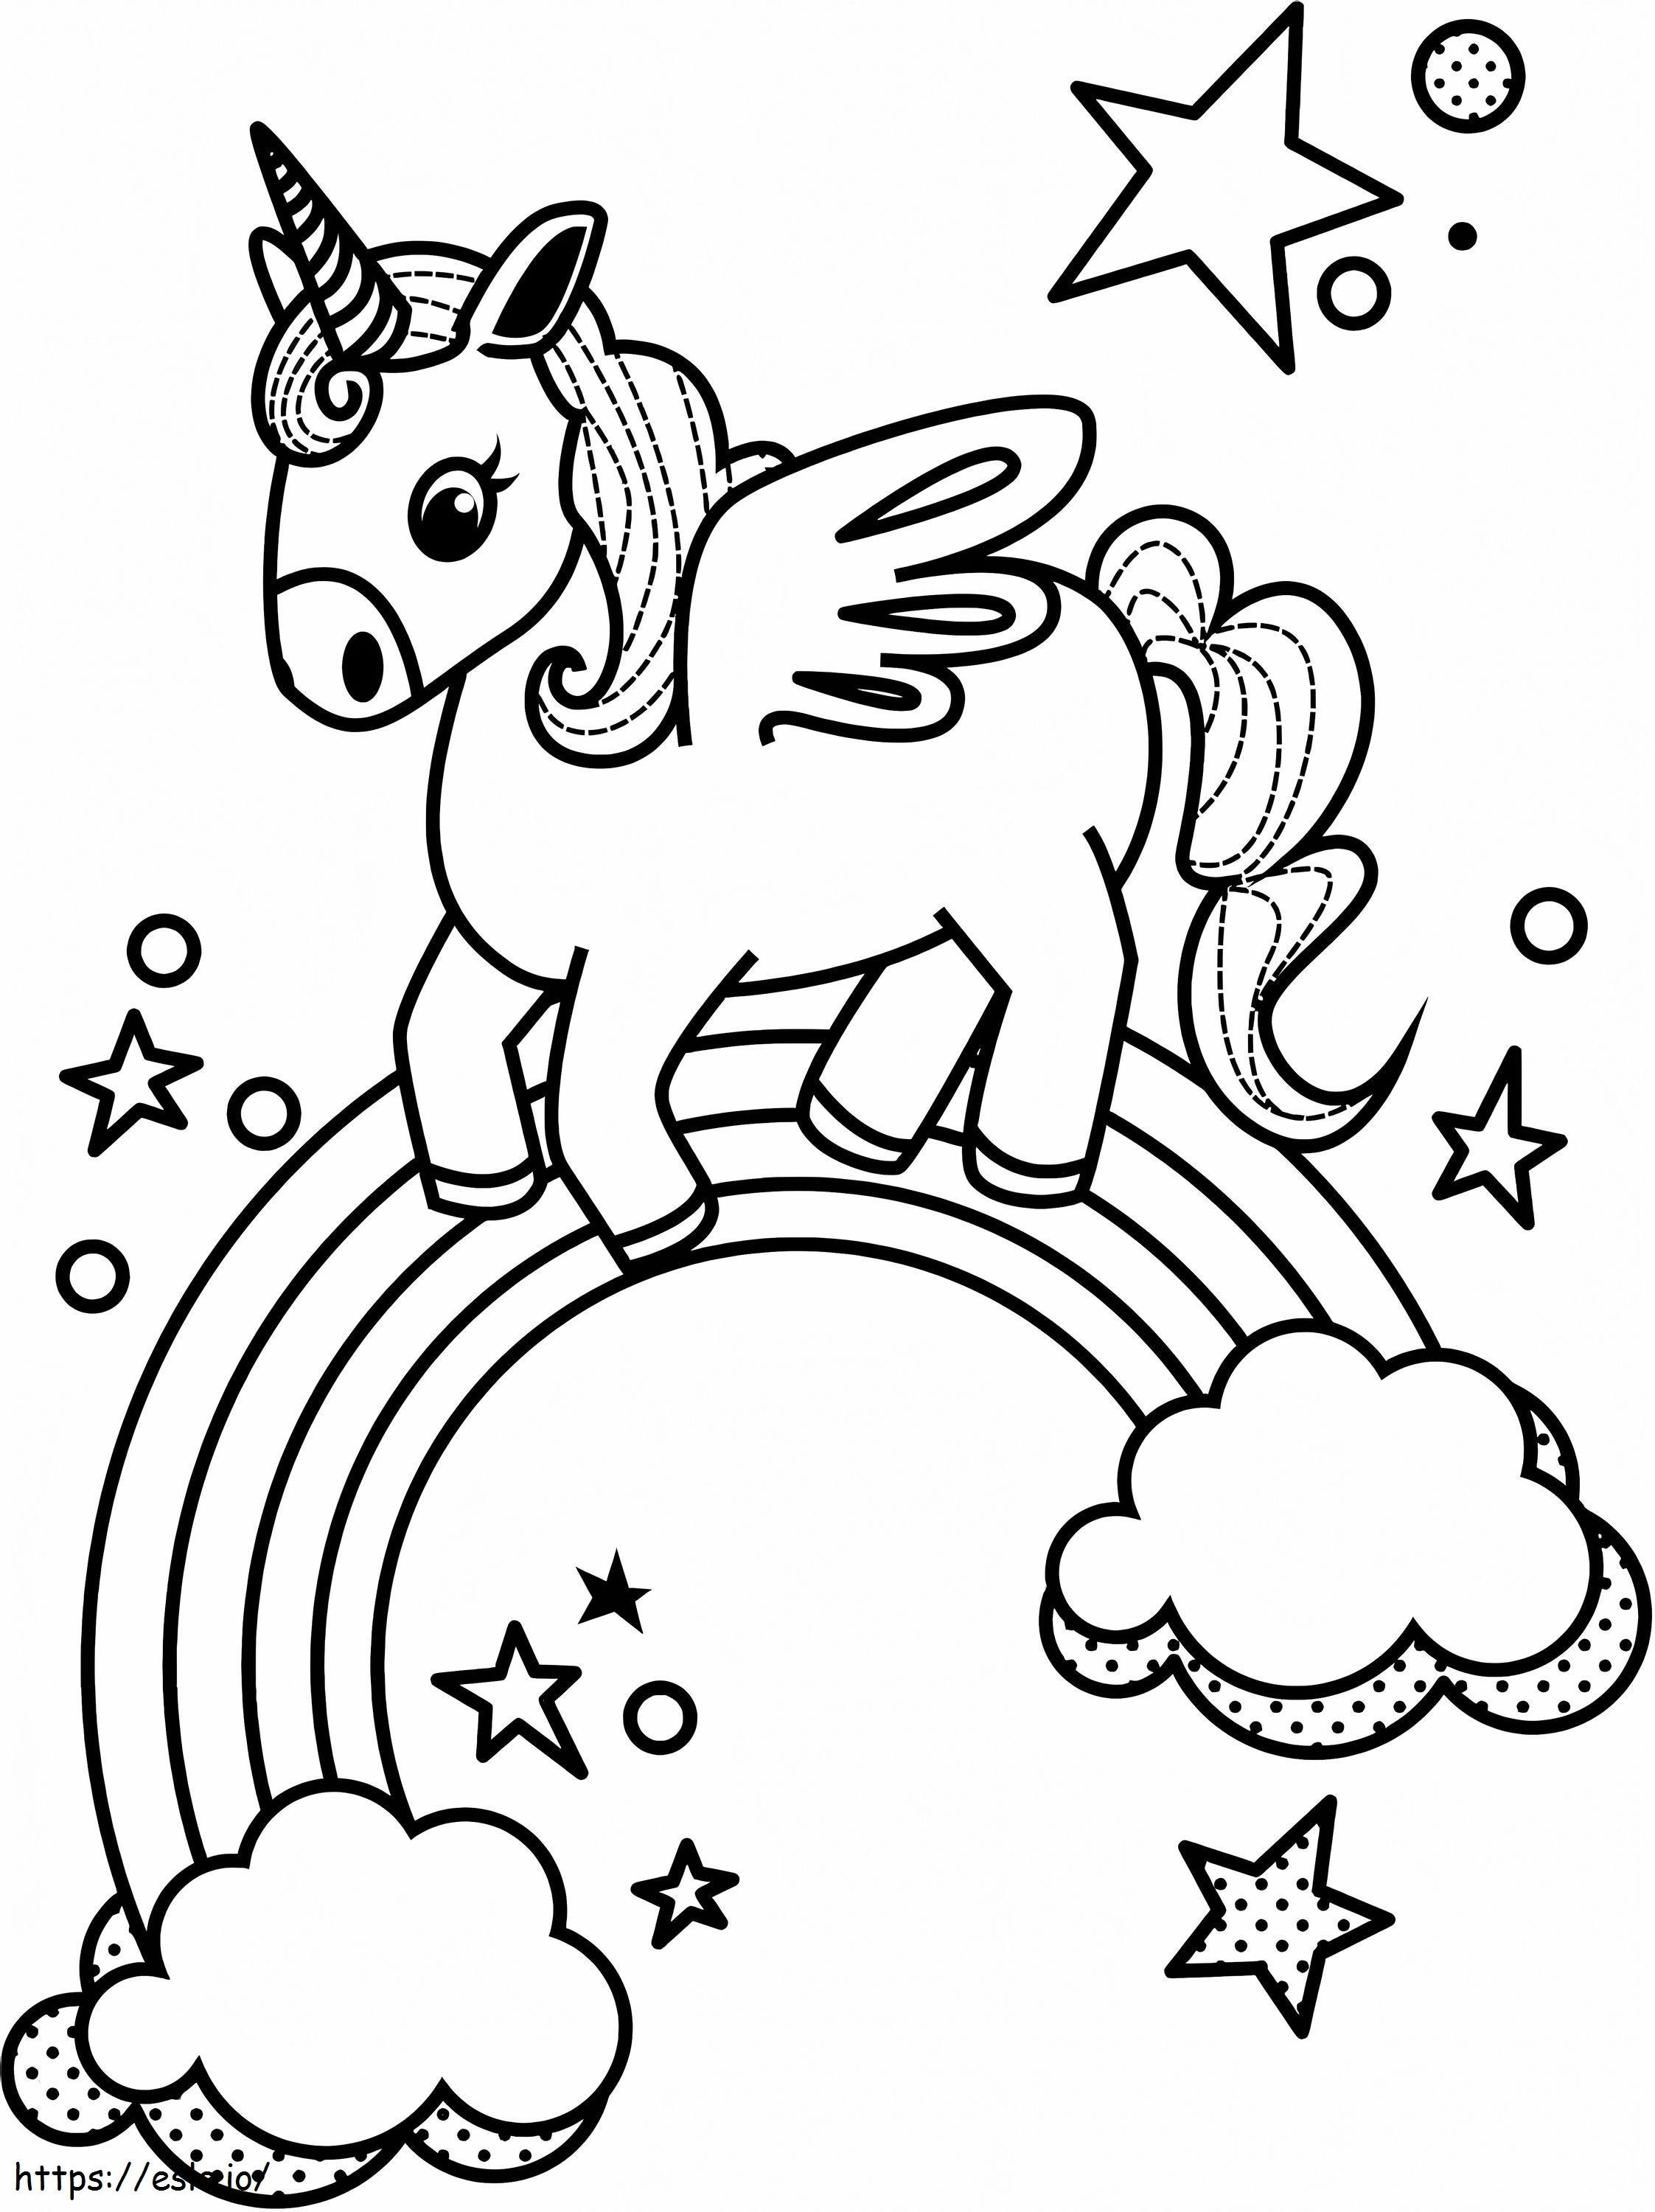 1563844817 Little Unicorn N Rainbow A4 coloring page